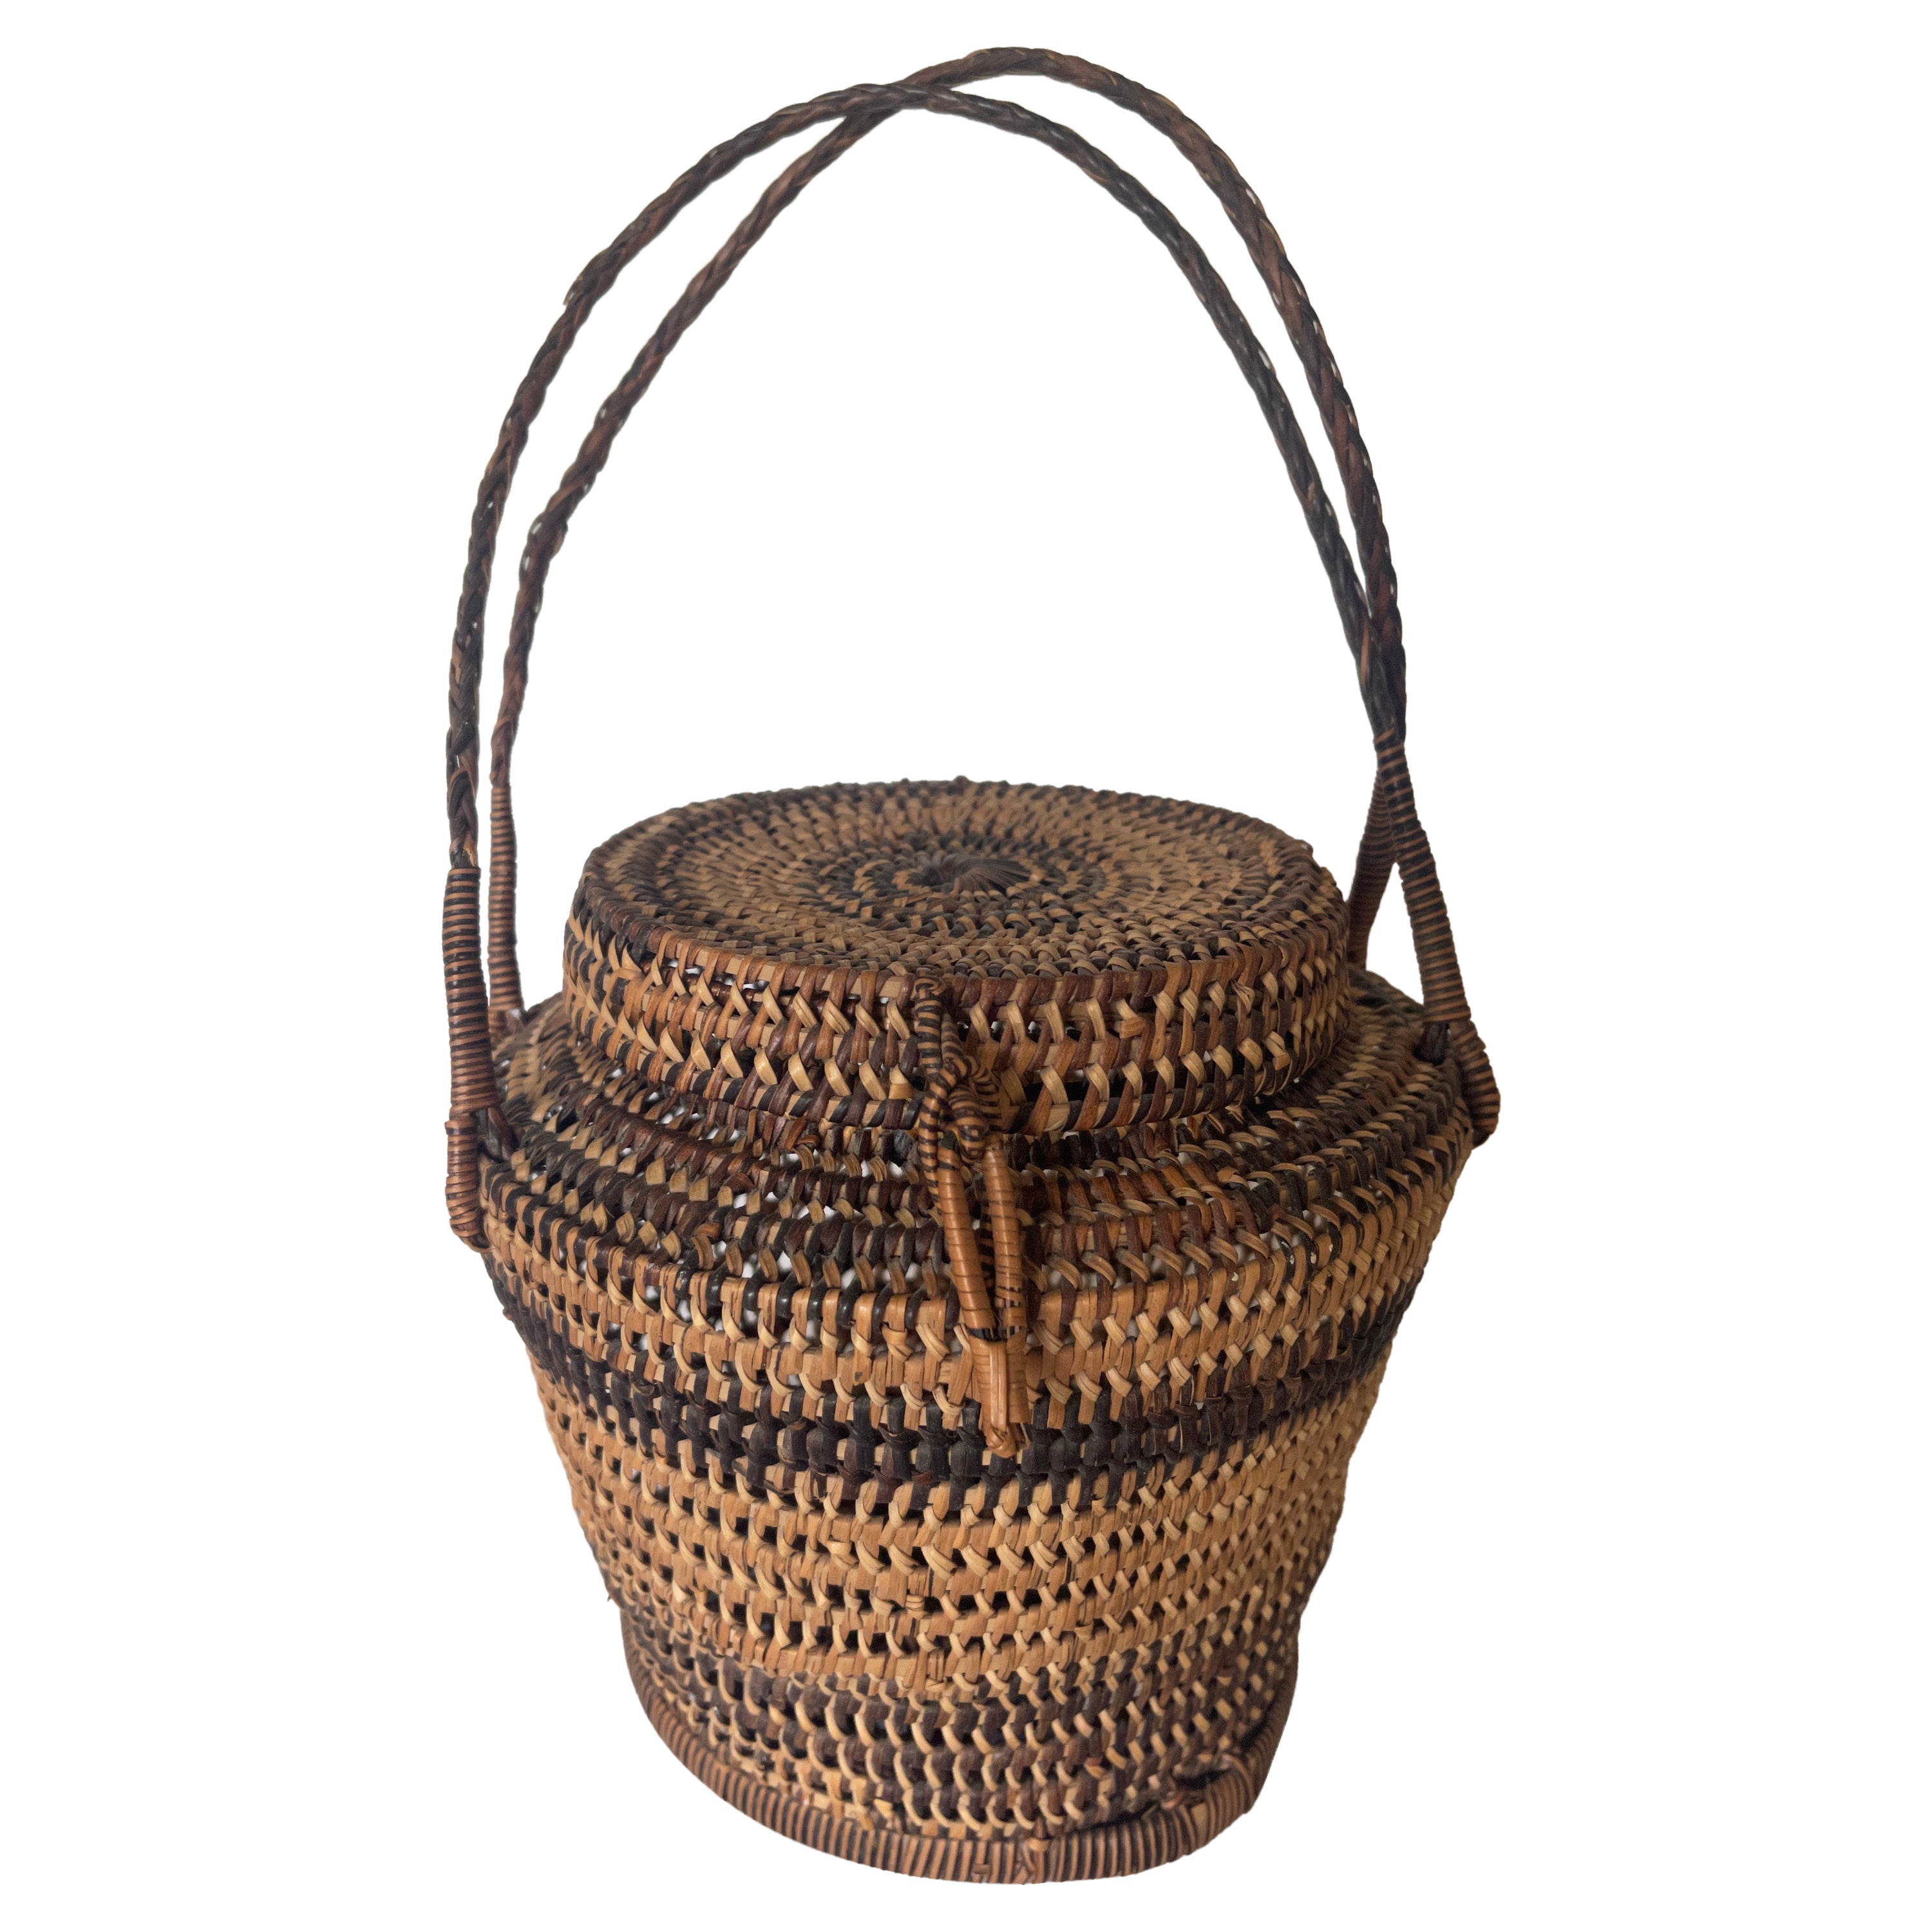 1930's Hand Woven Fish Basket Purse Bucket Bag For Sale